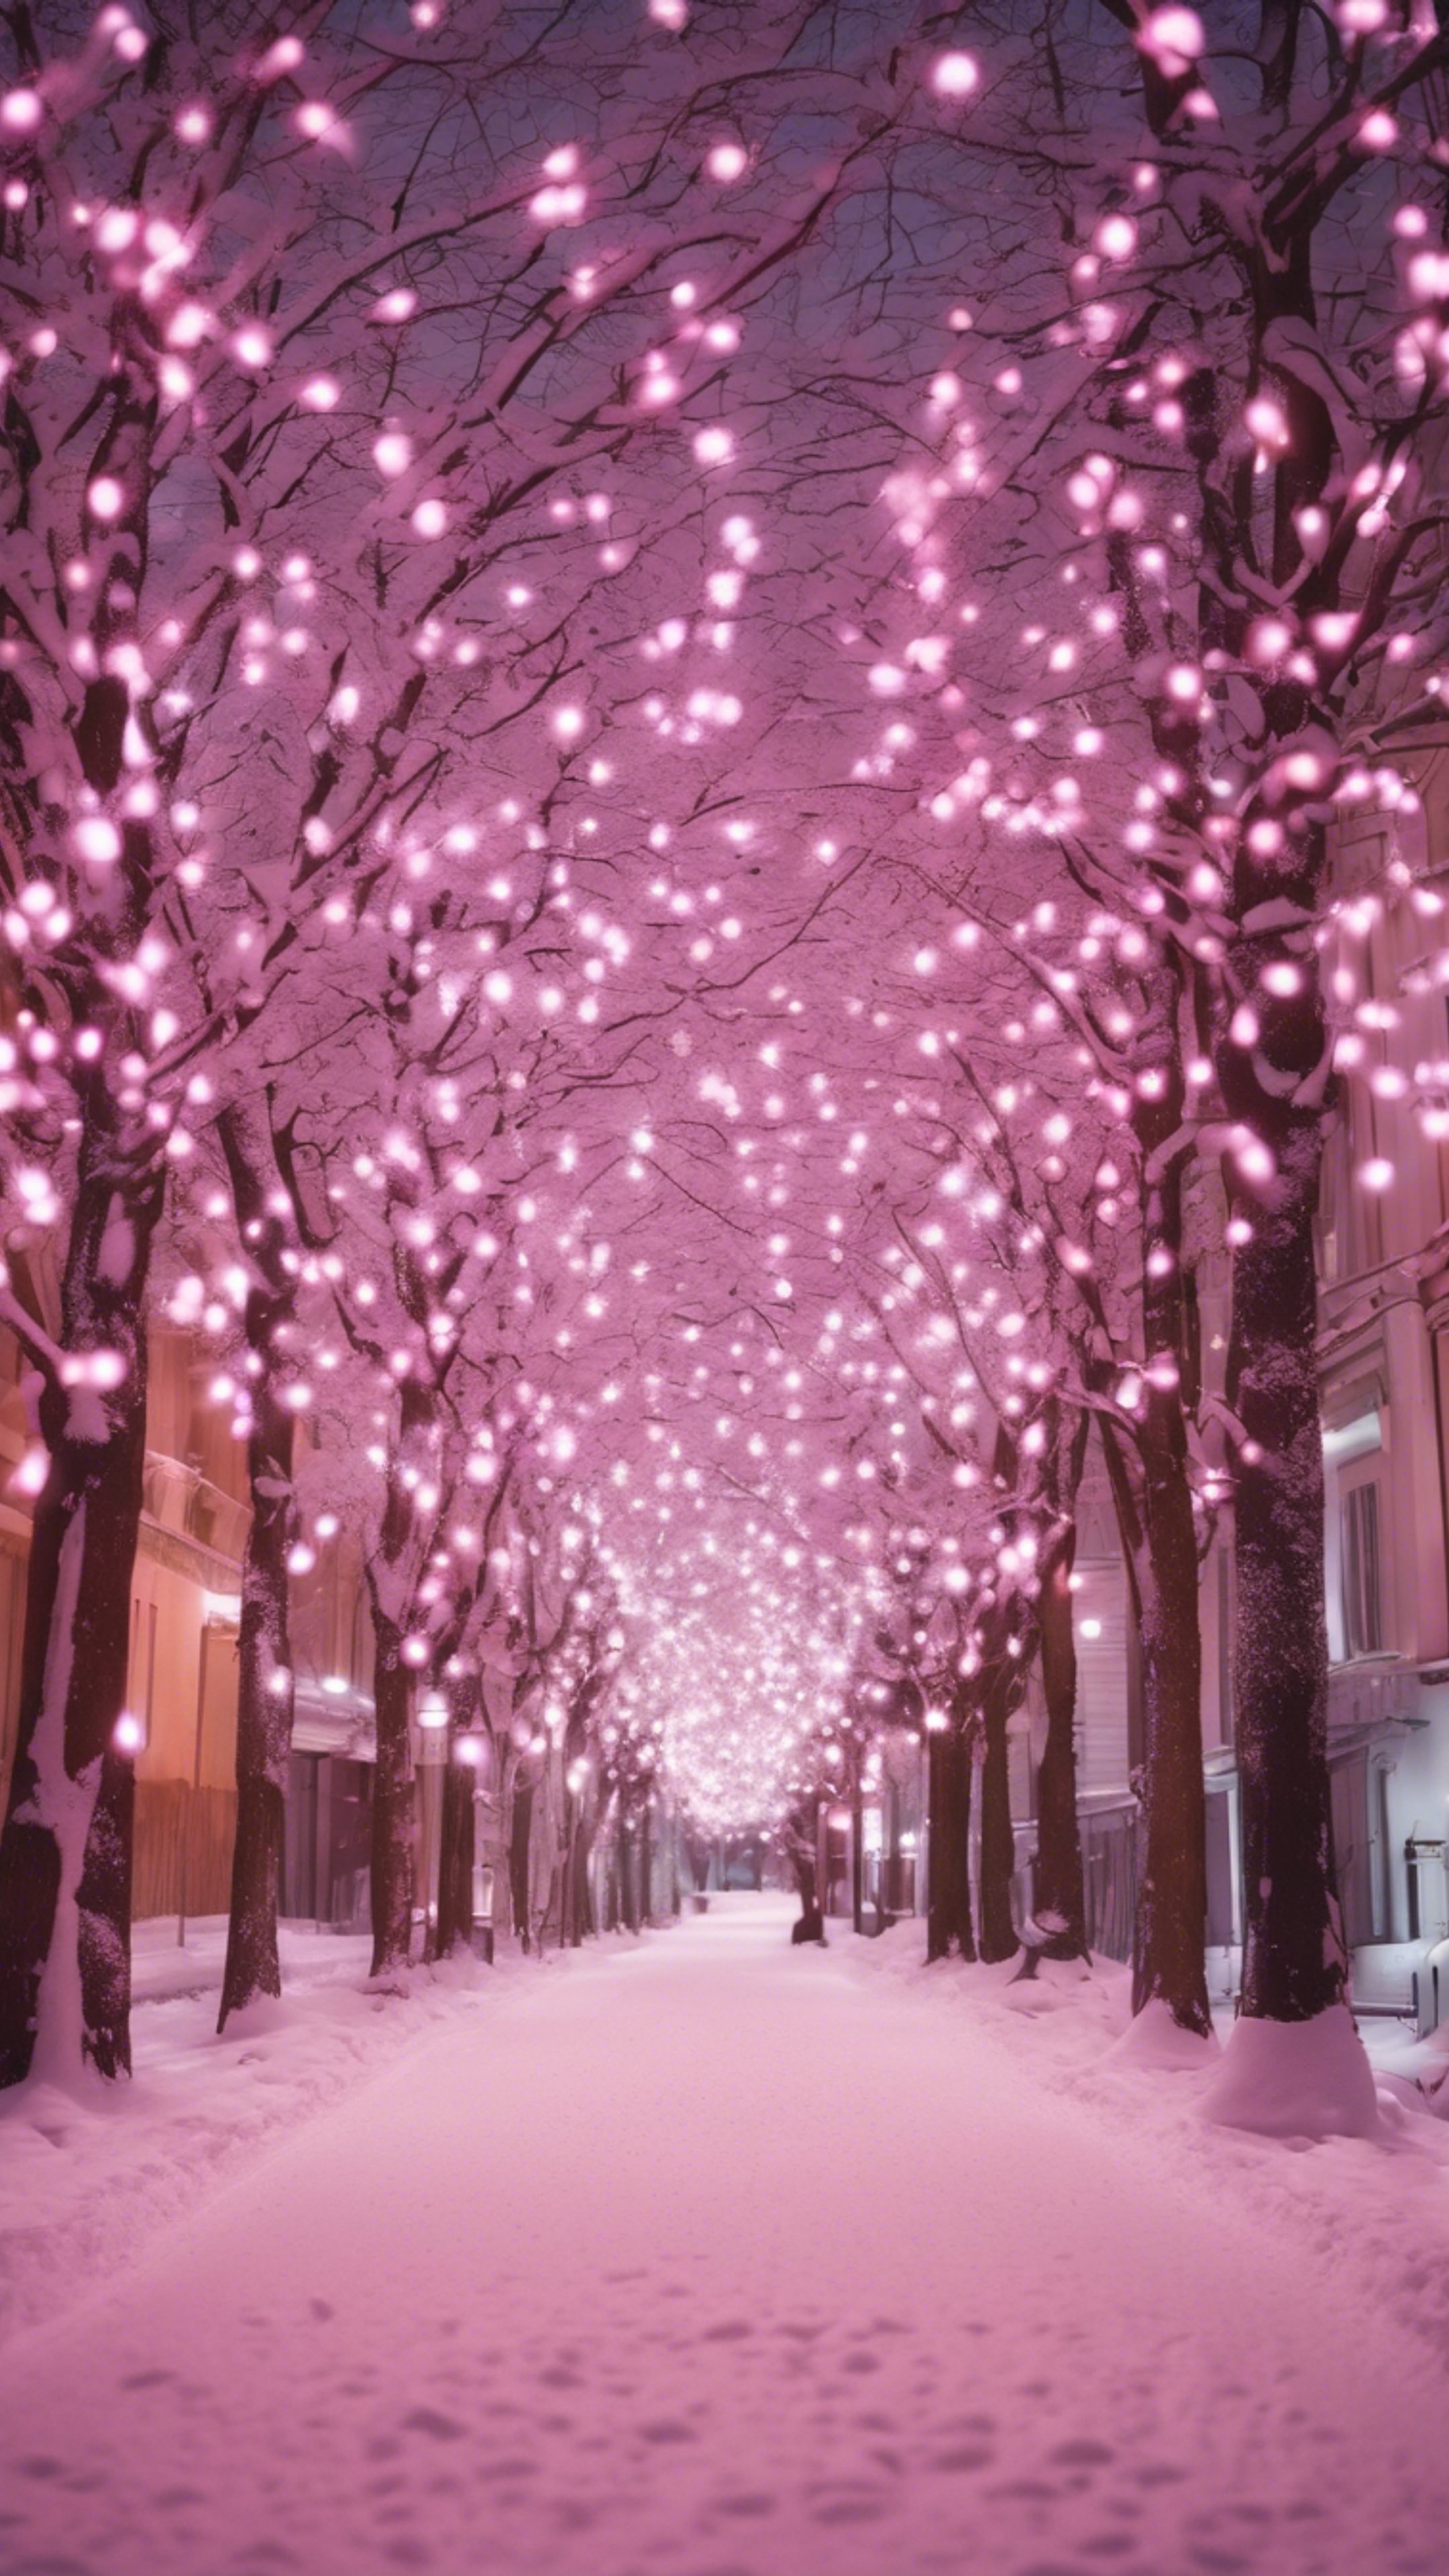 A snow-covered street illuminated by twinkling pink Christmas lights.壁紙[4ec6c372f2074900819e]